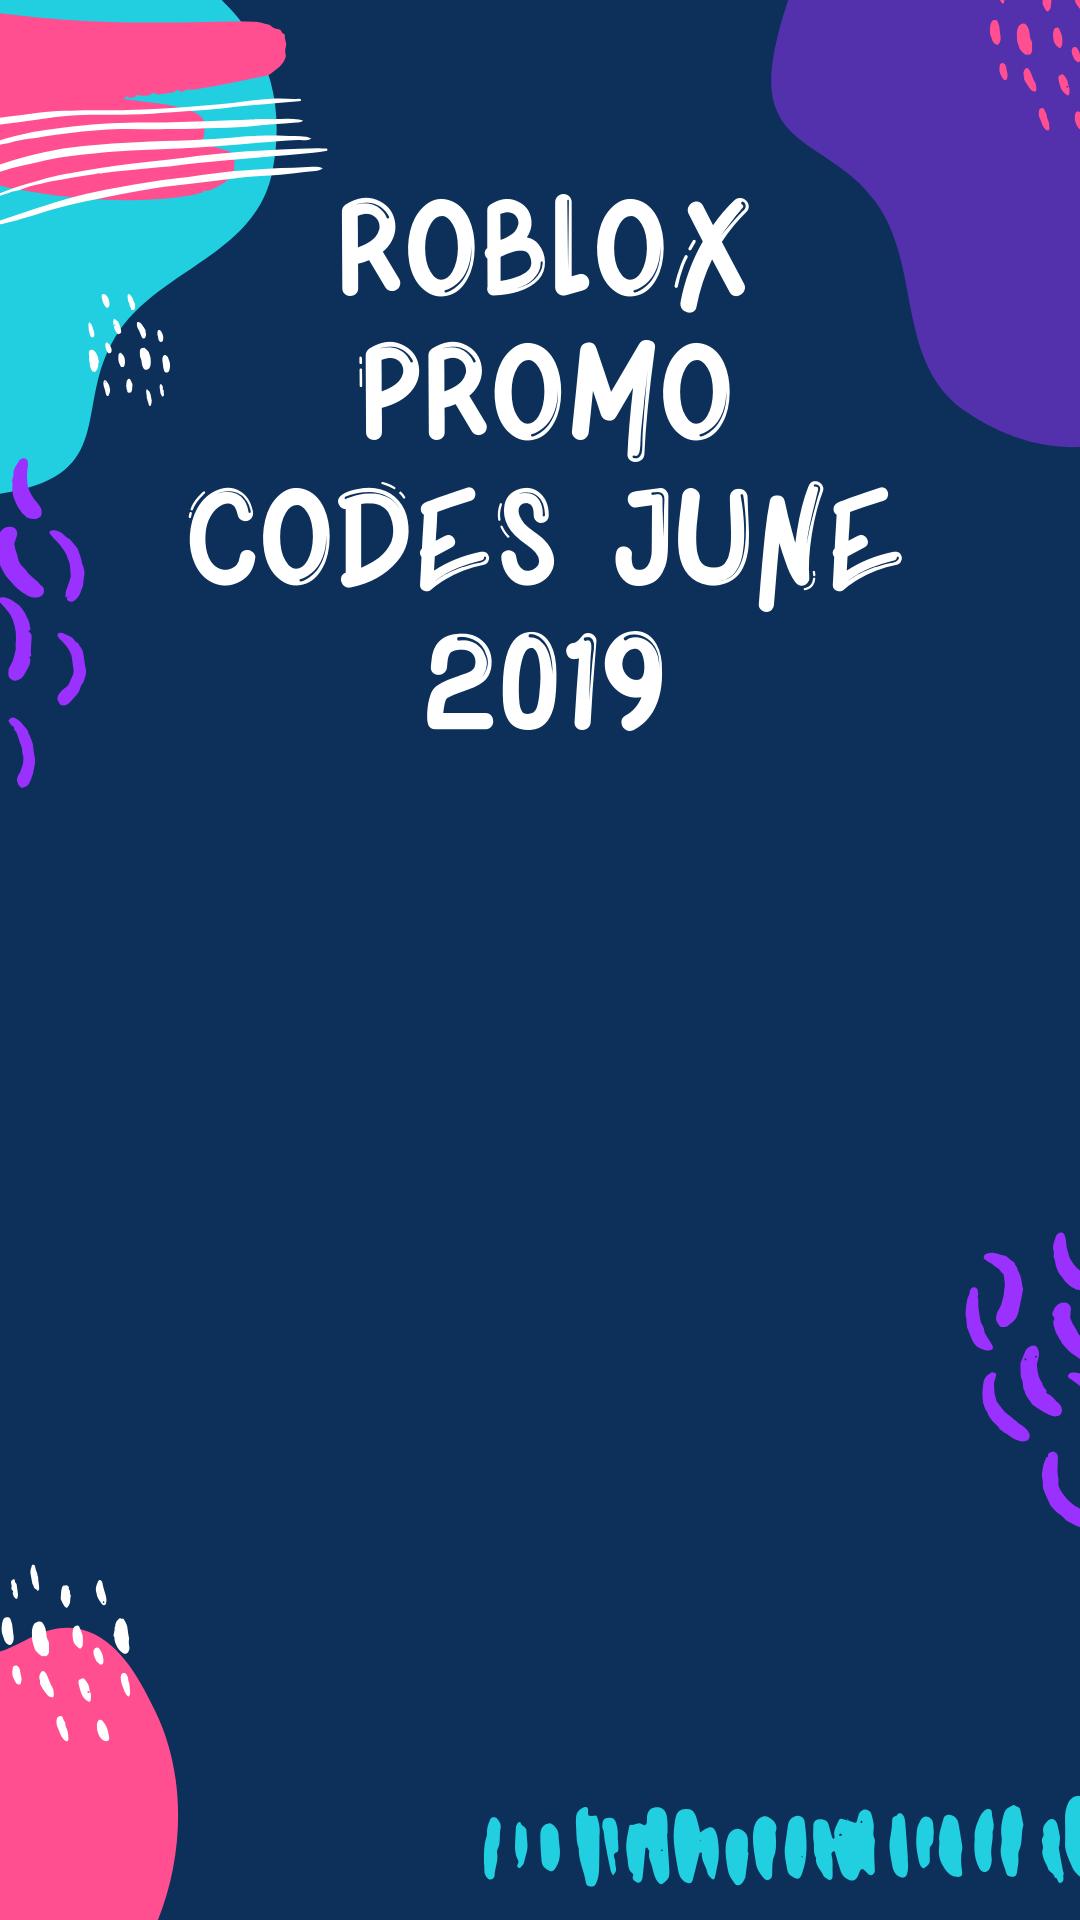 Roblox Promo Codes 2020 On Twitter Roblox Working Promo Code June 2019 Spider Cola Just Enter Promo Code Spidercola Click Here To Get All New Roblox Promo Codes Today S Link Https T Co Co1ltinps5 Robloxnew - all promo codes roblox 2019 june